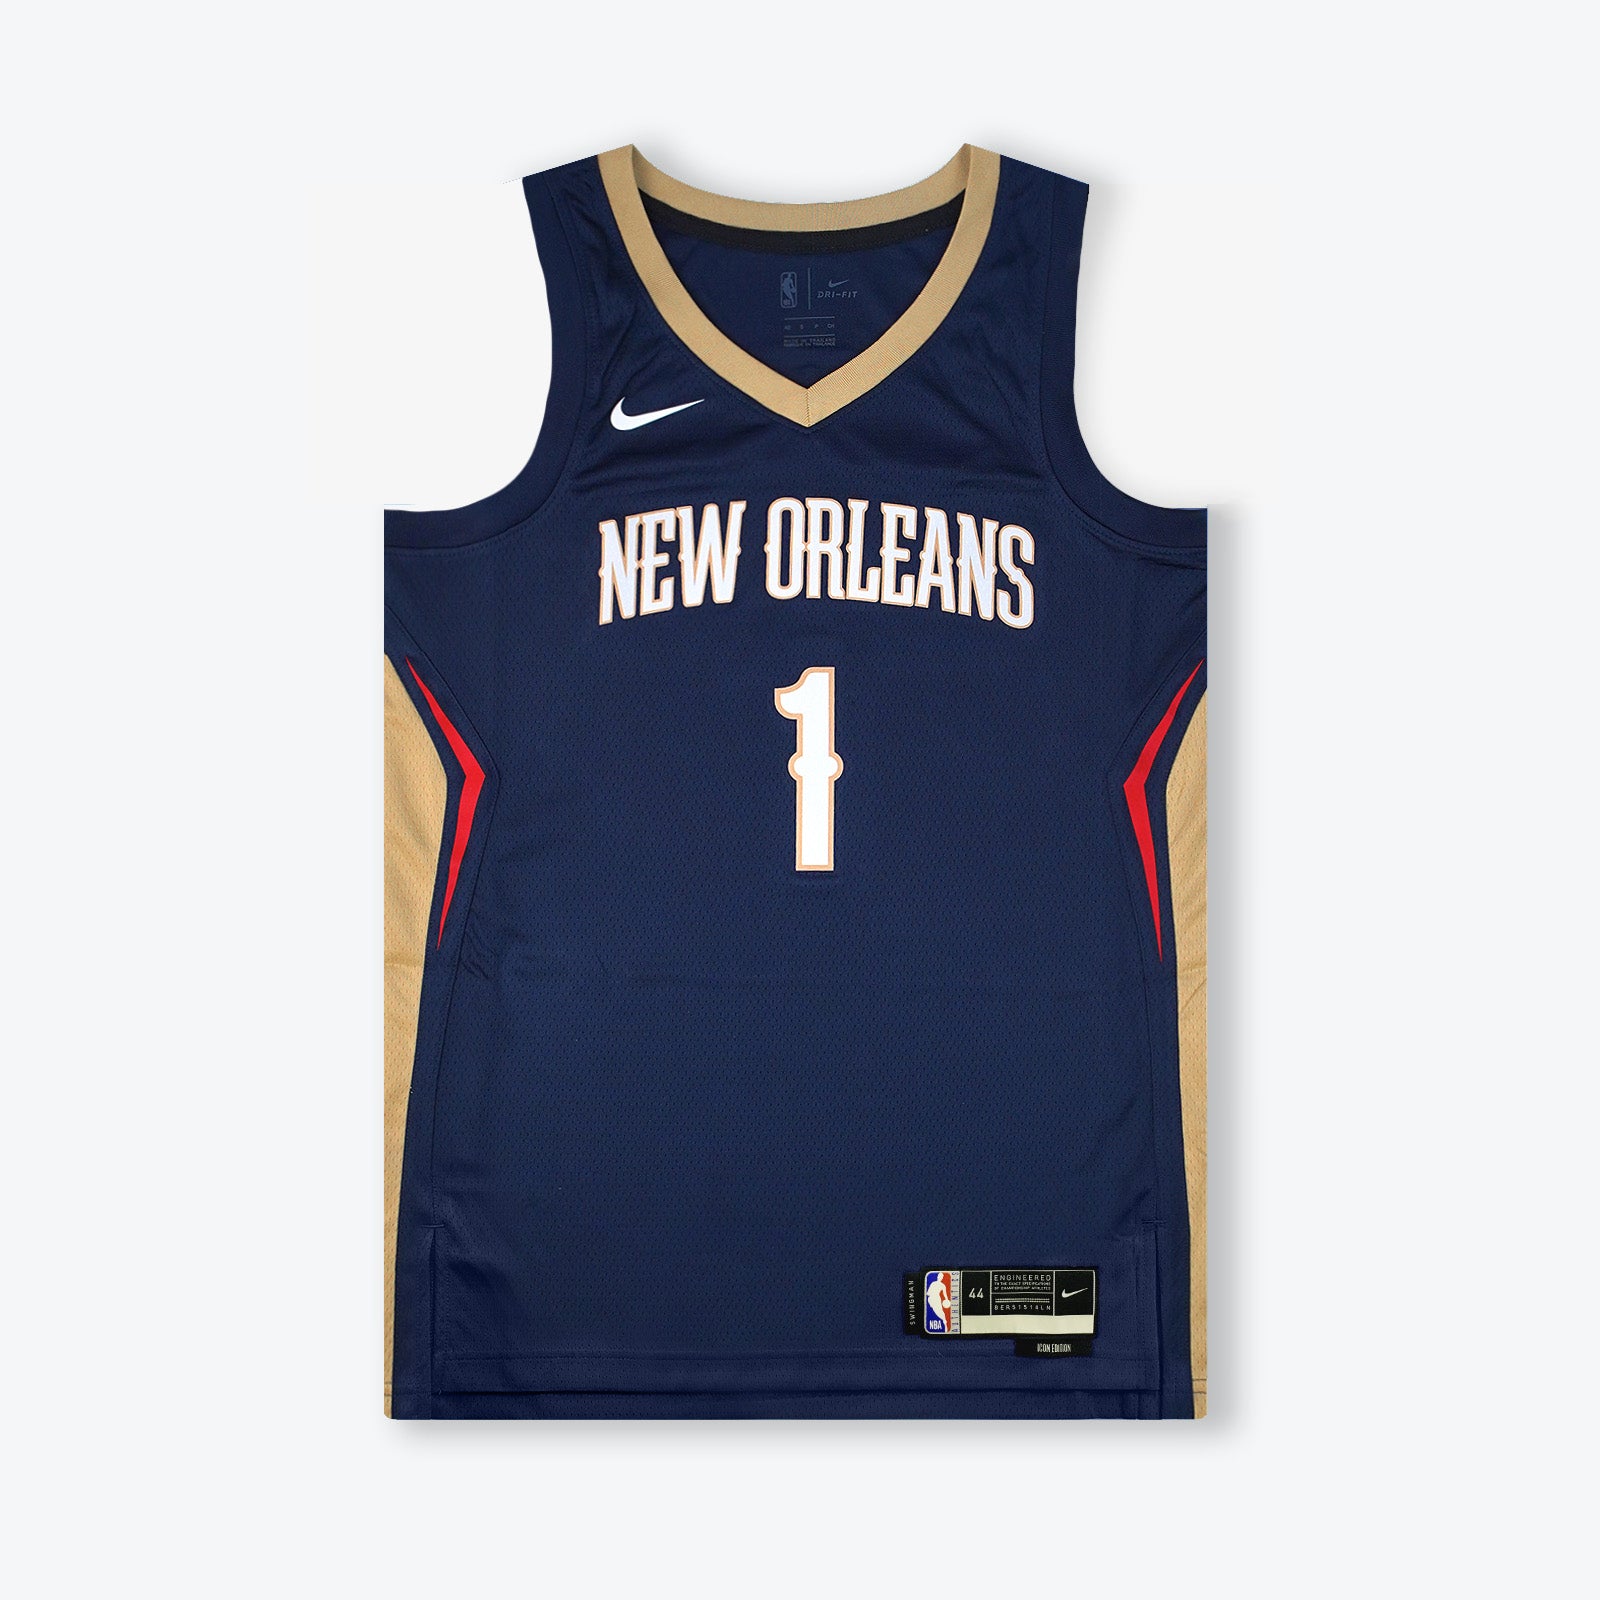 New Orleans Pelicans Jersey For Babies, Youth, Women, or Men